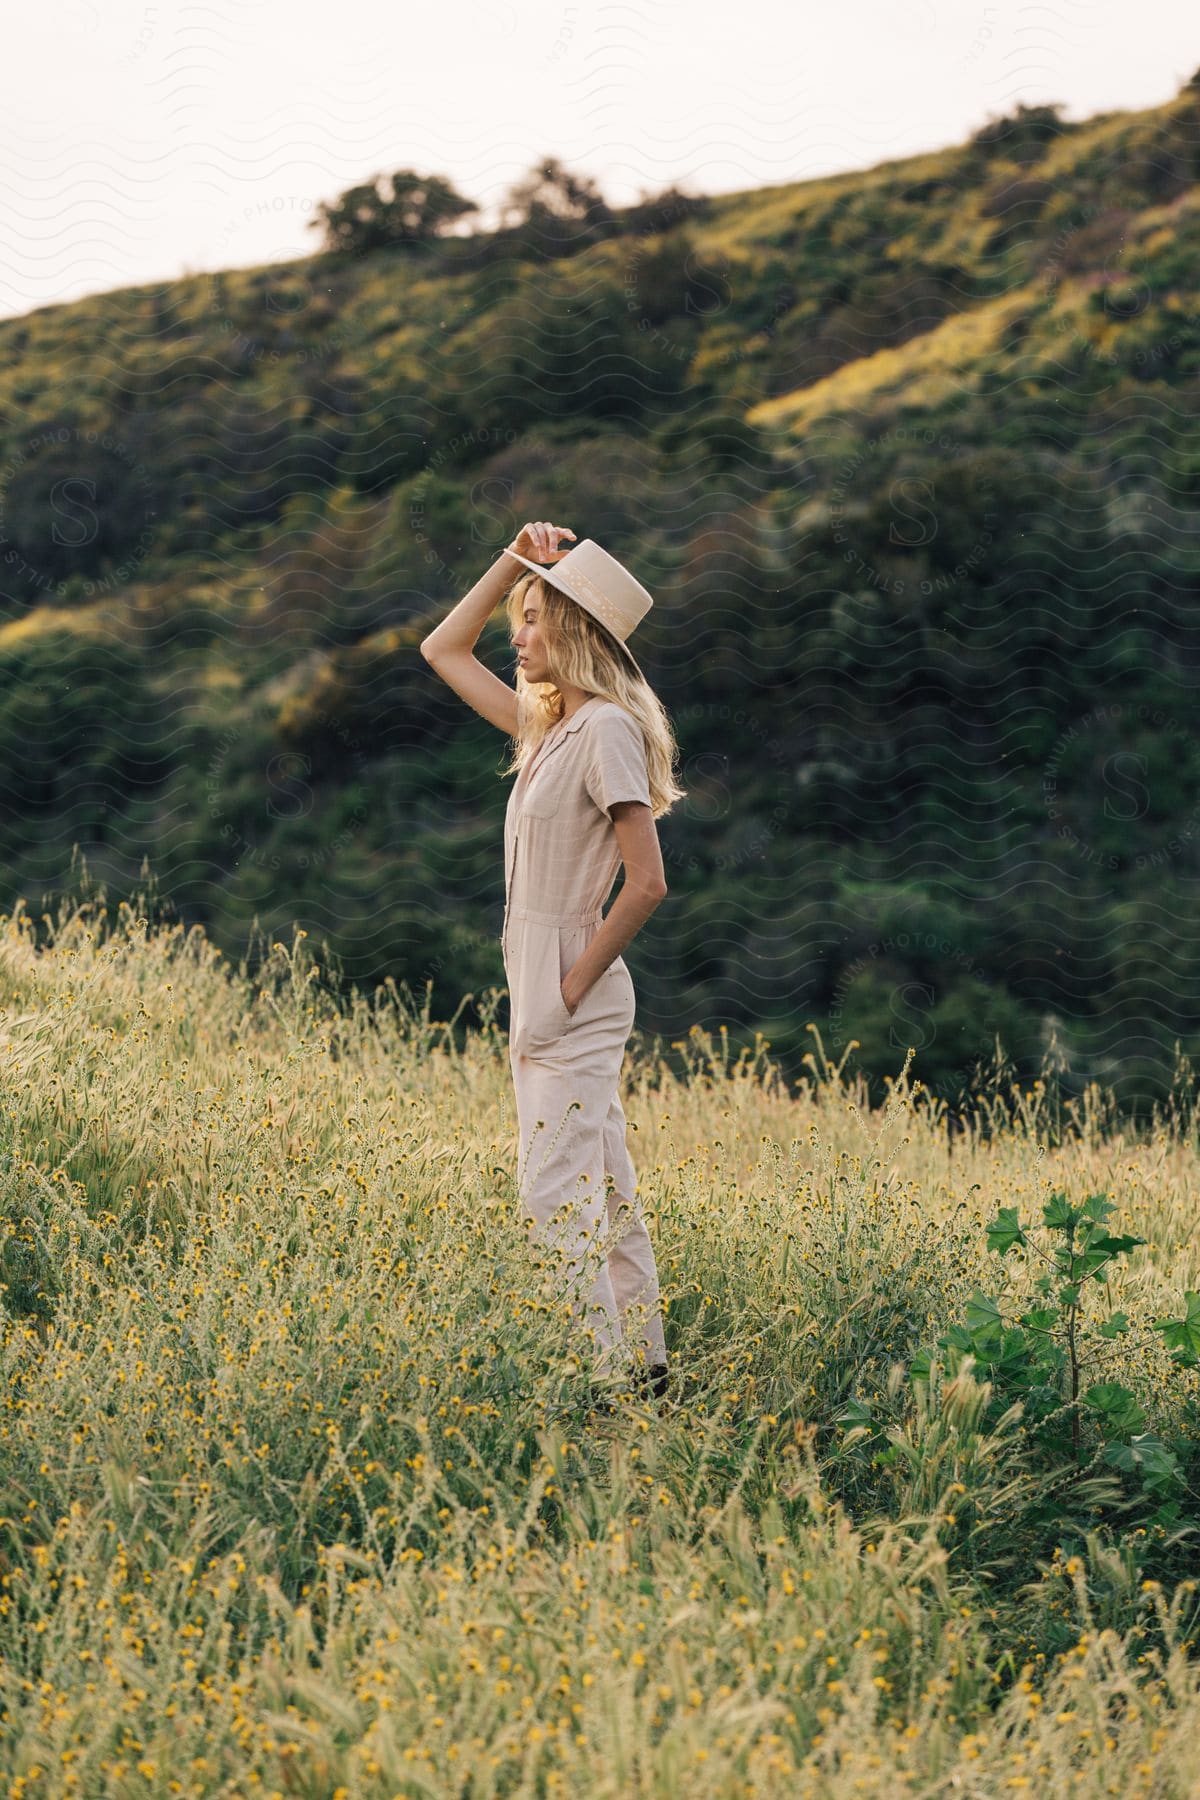 A person standing in a field with a hat and pants under a sunny sky determined